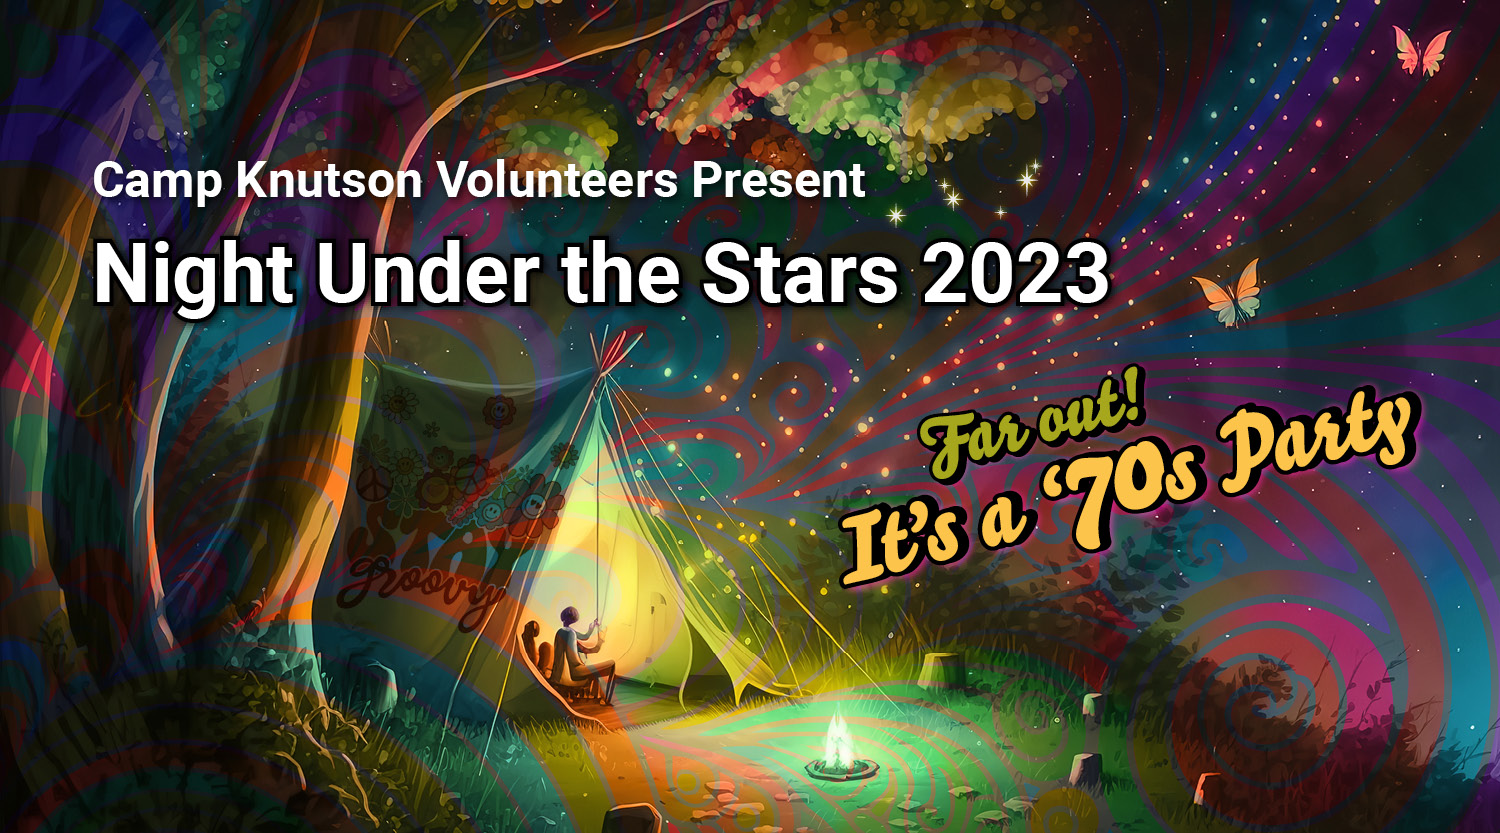 Graphic with swirling colors and two people in a tent with a campfire outside and the text "Far out! It's a '70s Party" Camp Knutson's Night Under the Stars 2023